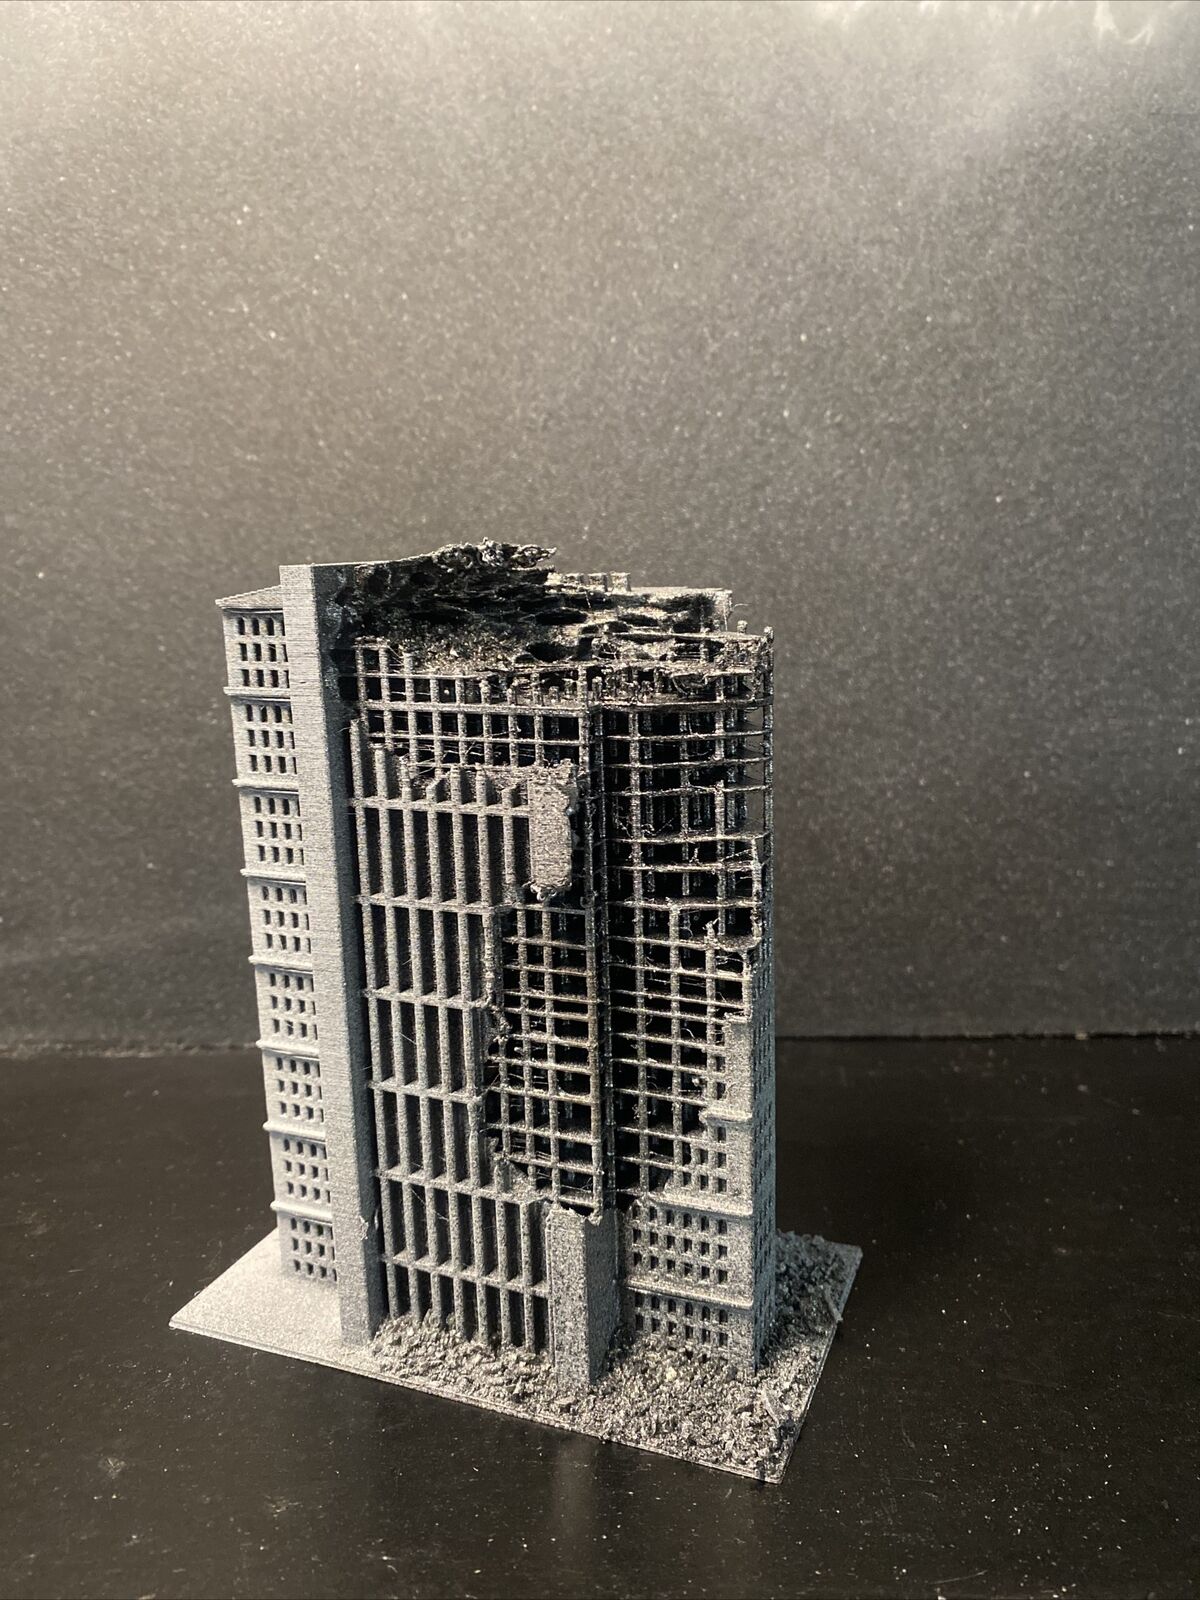 Eyepop Designs 1 XL Building 1/200 Scale works with NECA Sh Monsterarts 